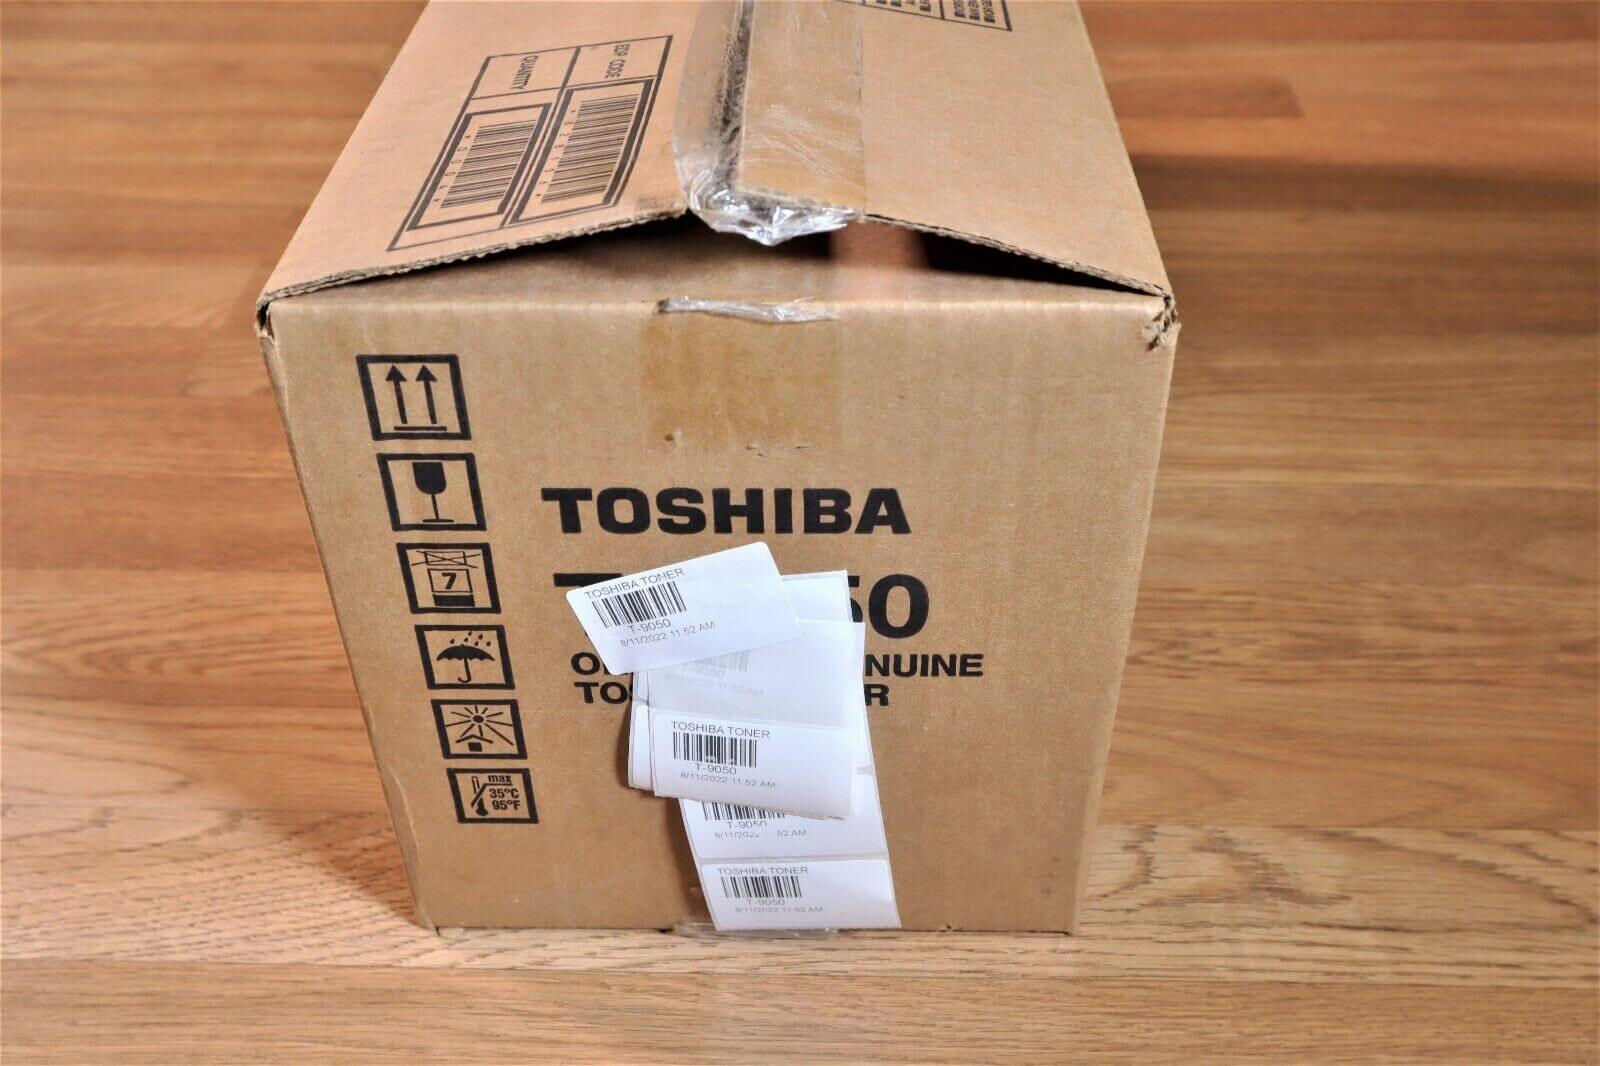 4Pack Toshiba T-9050 Toner Cartridges e-STUDIO905/1105/1355 -Same Day Shipping! - copier-clearance-center